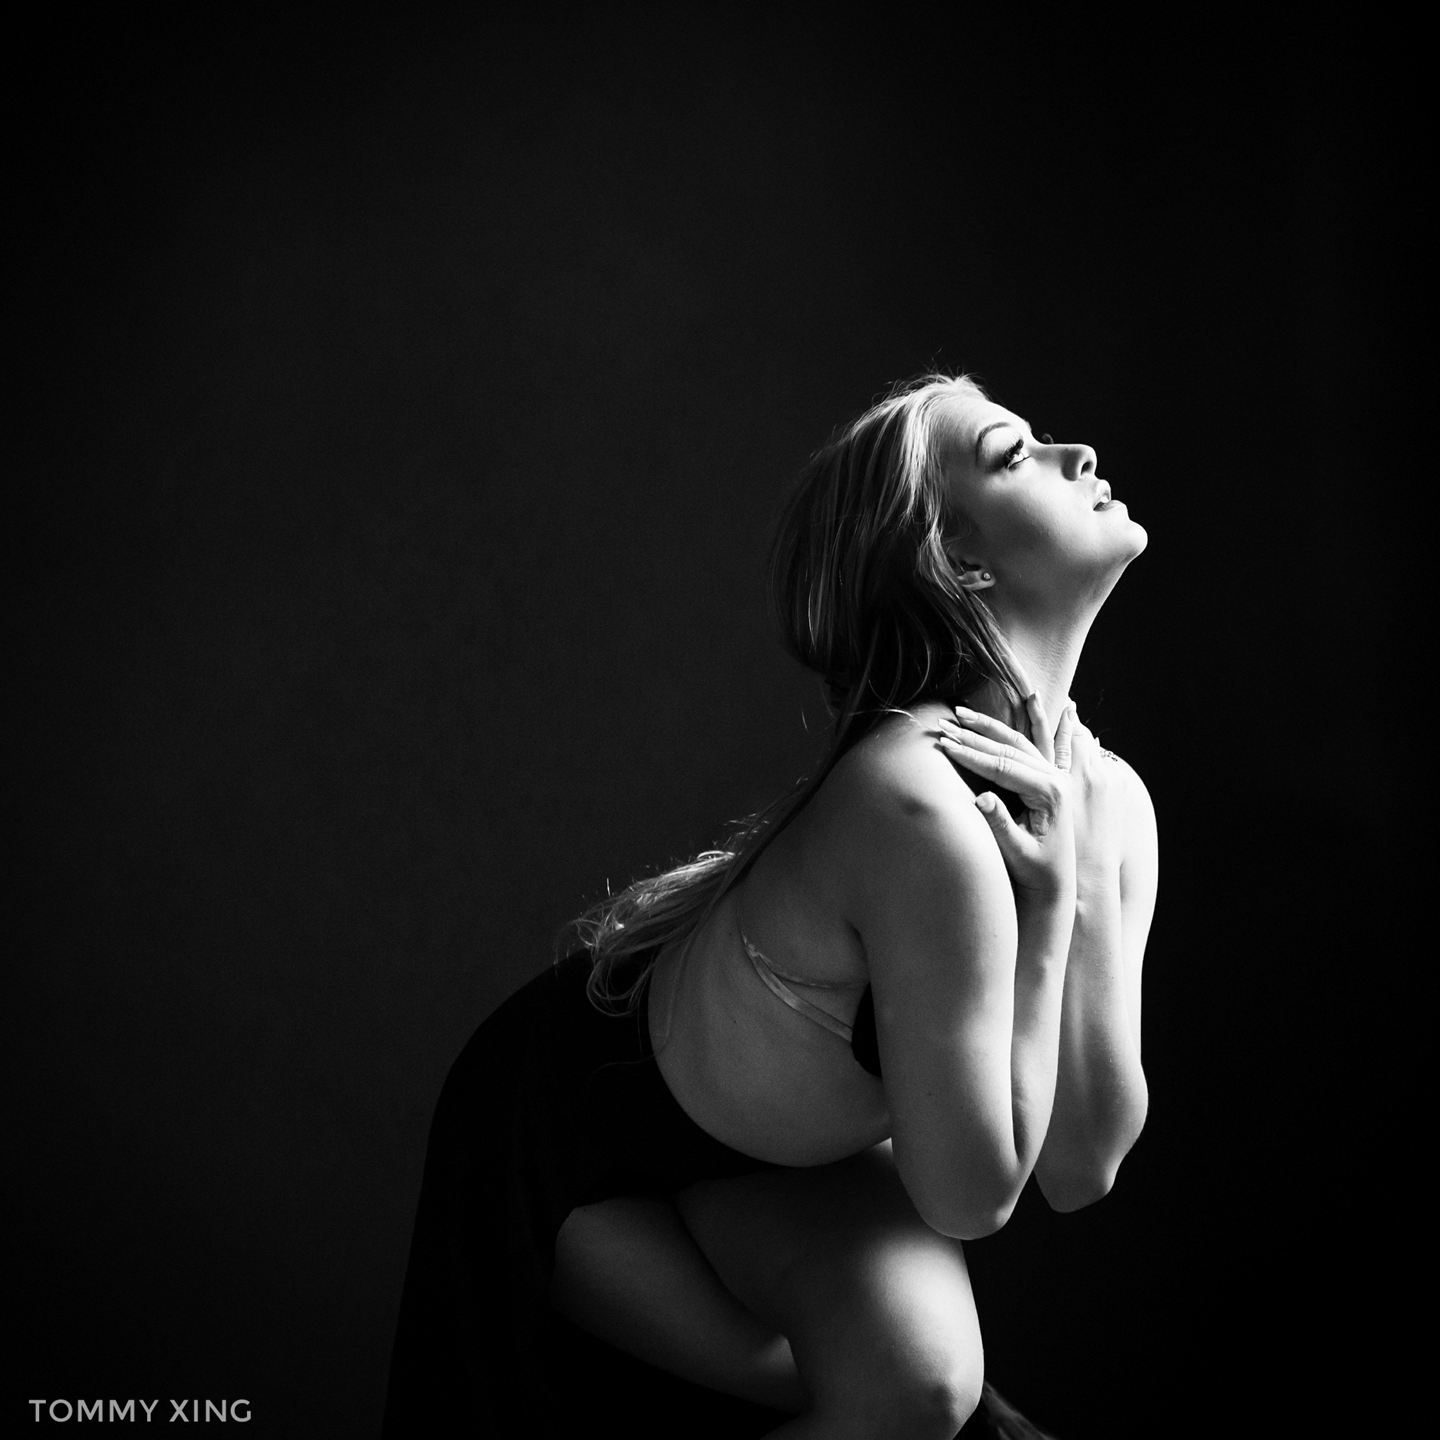 Los Angeles Dance photography - Haley - Tommy Xing08.JPG